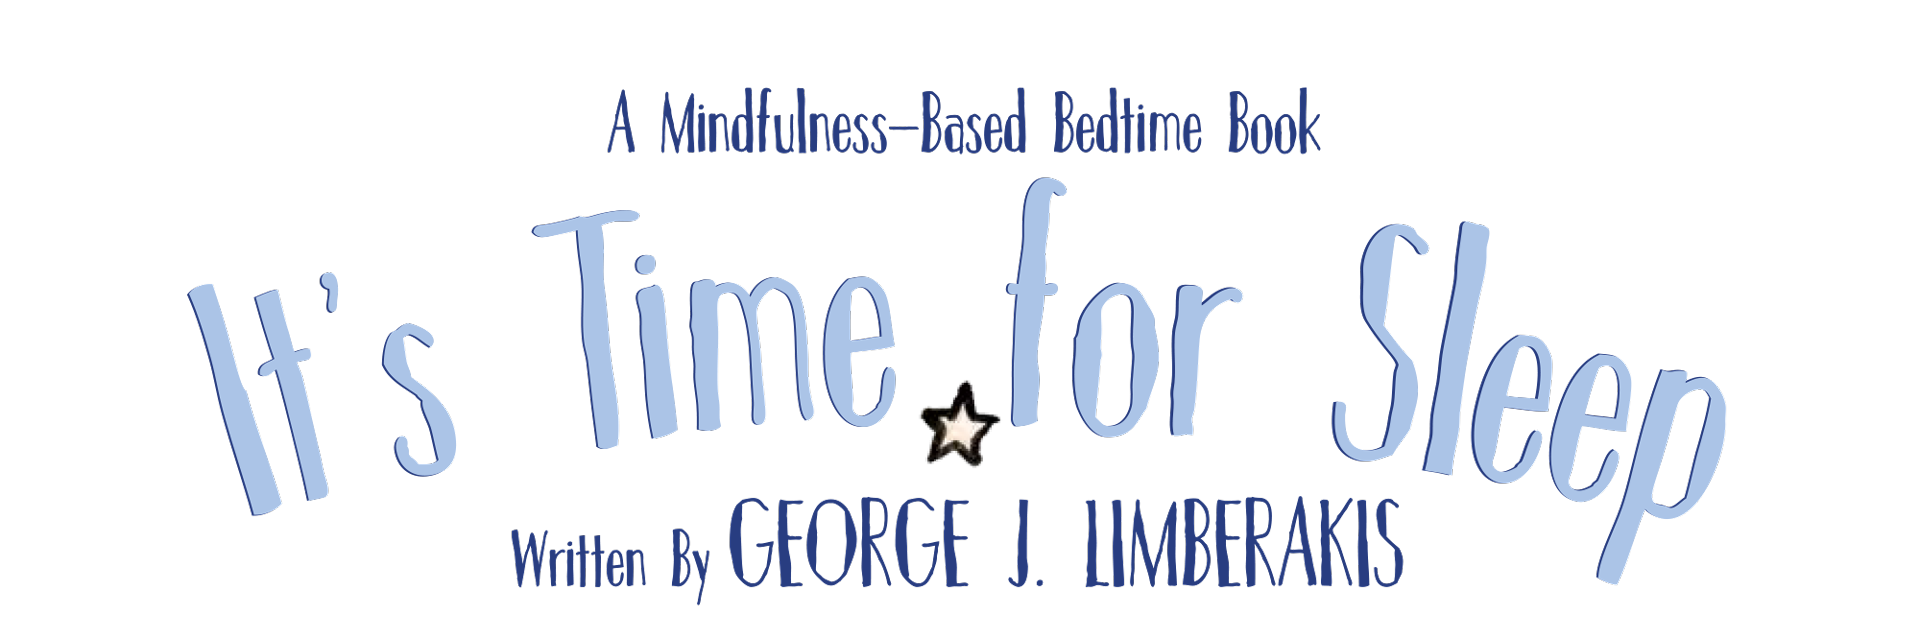 Childrens Book for Sleep and Mindfulness